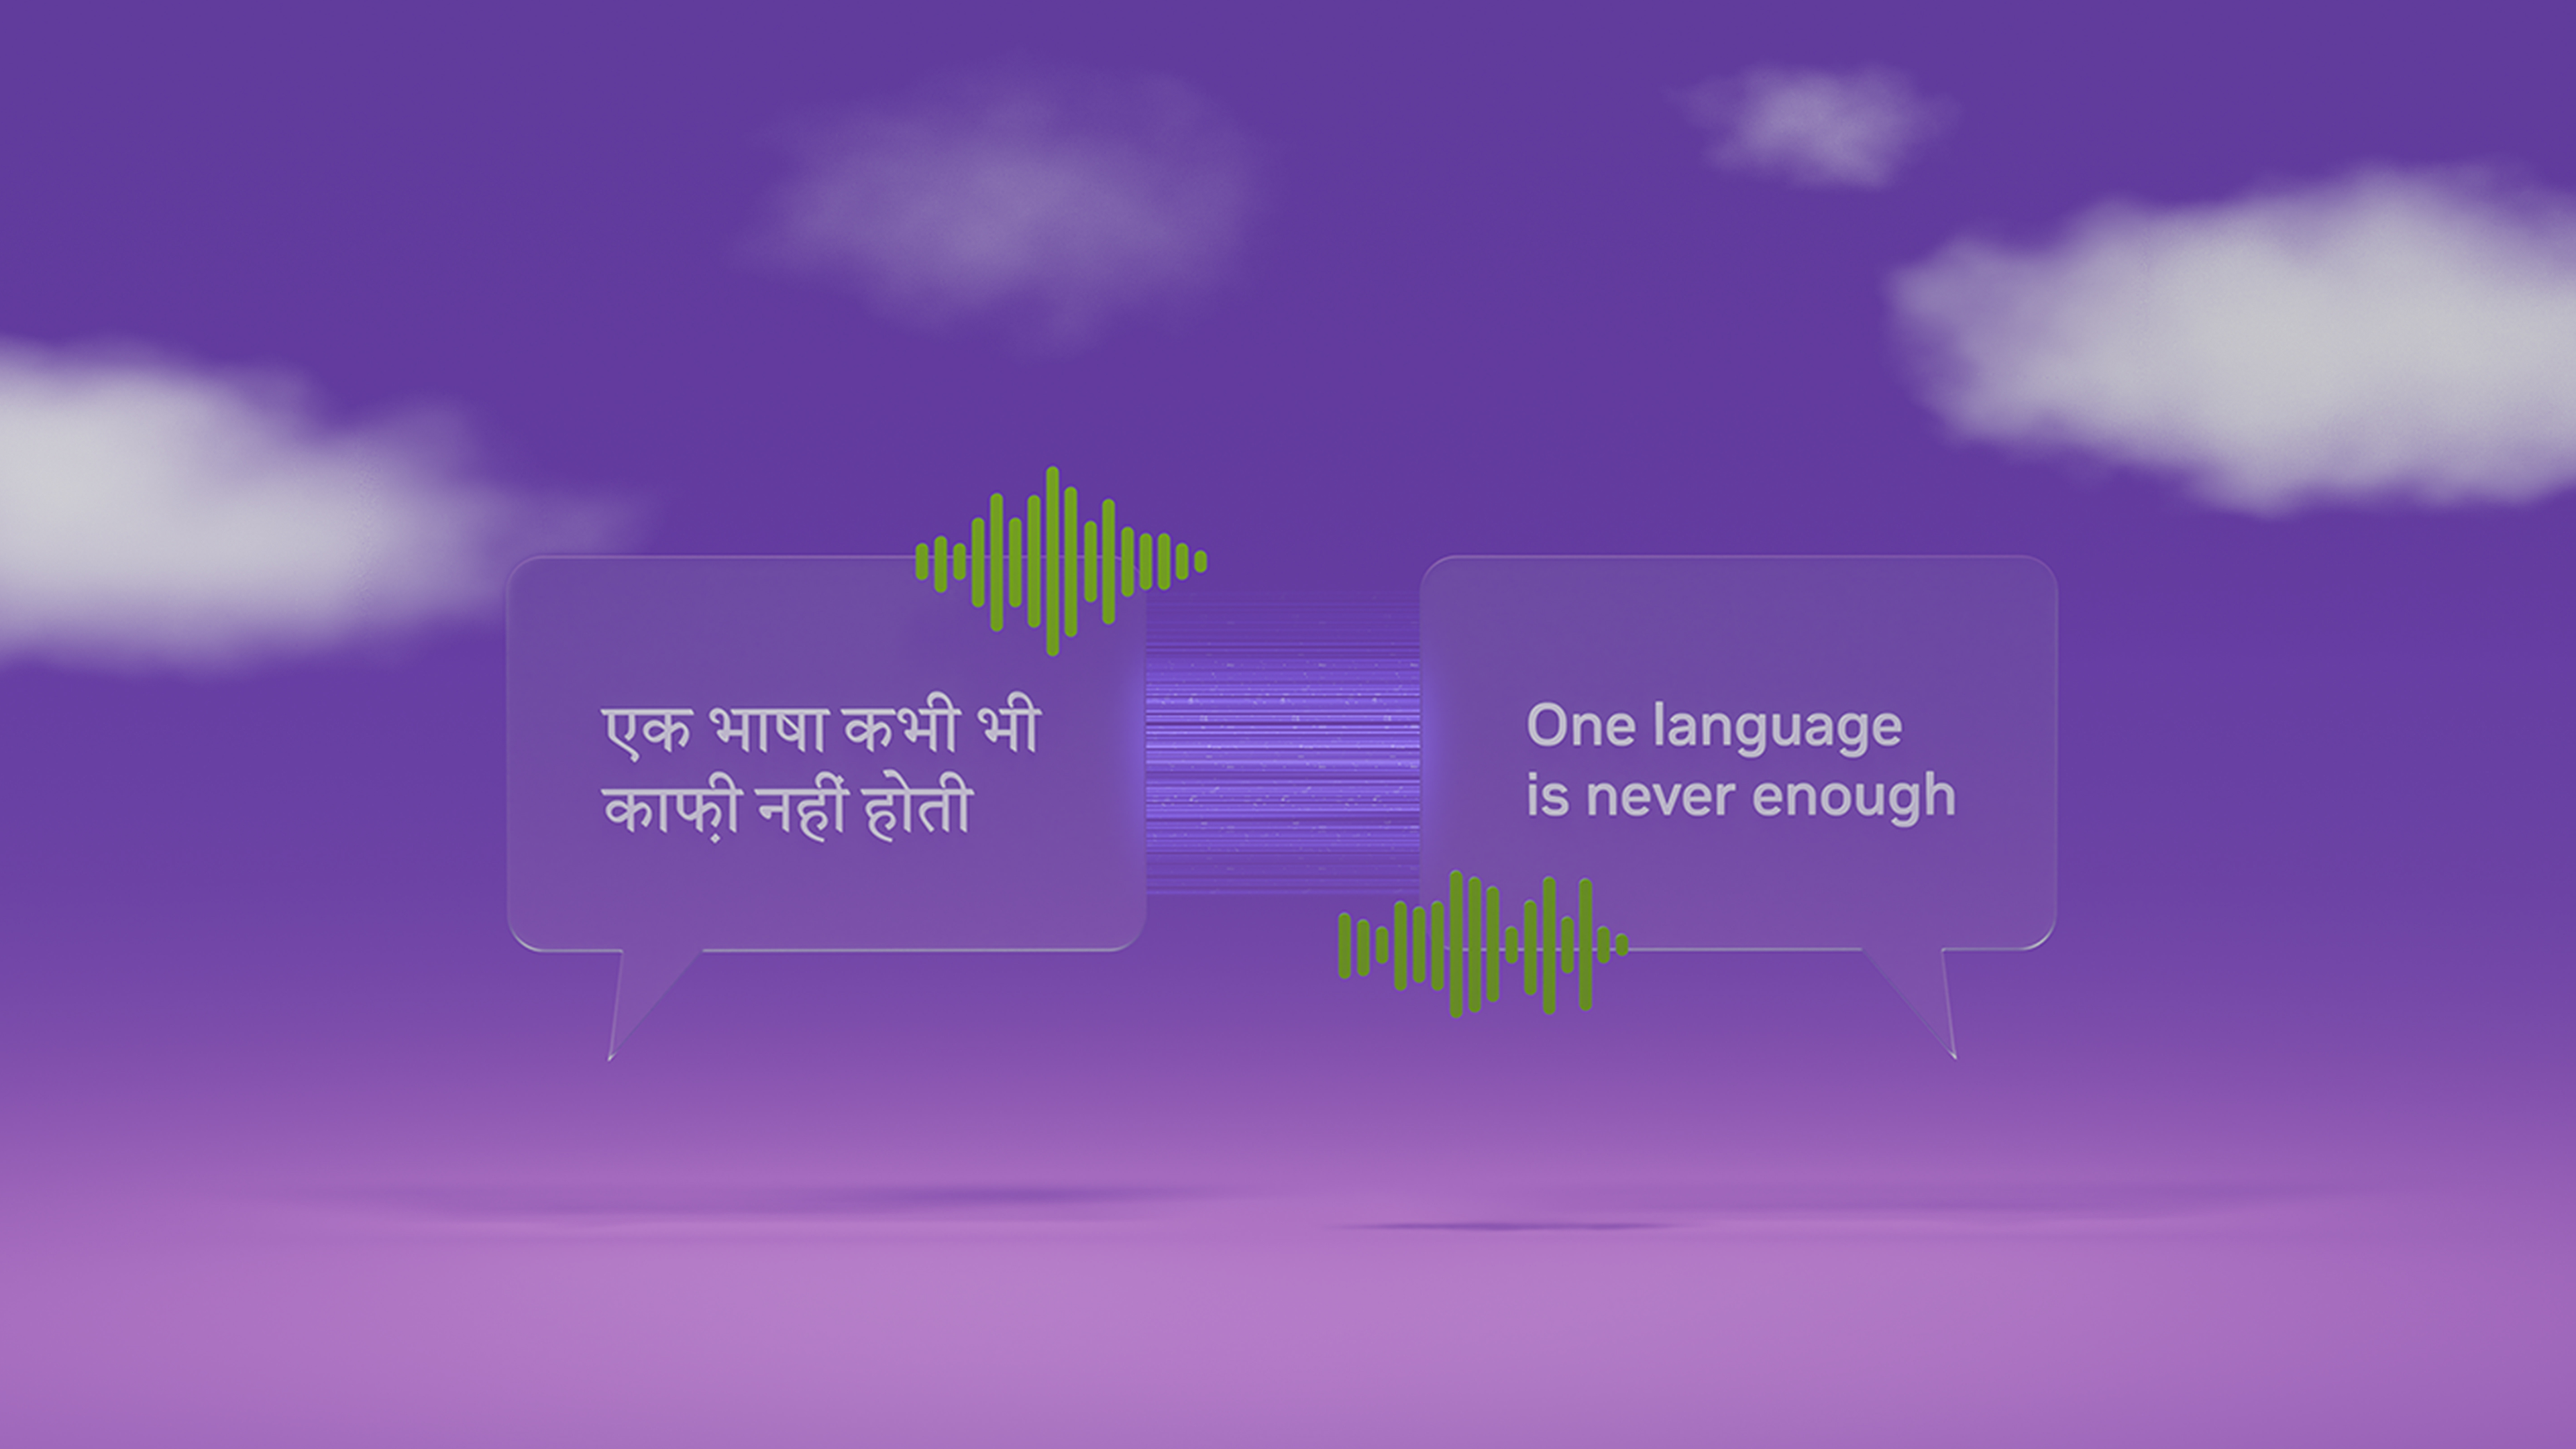 Image of two boxes with text, in two languages, with speech icons joining them to a central box symbolizing translation. The English language box displays, "One language is never enough."